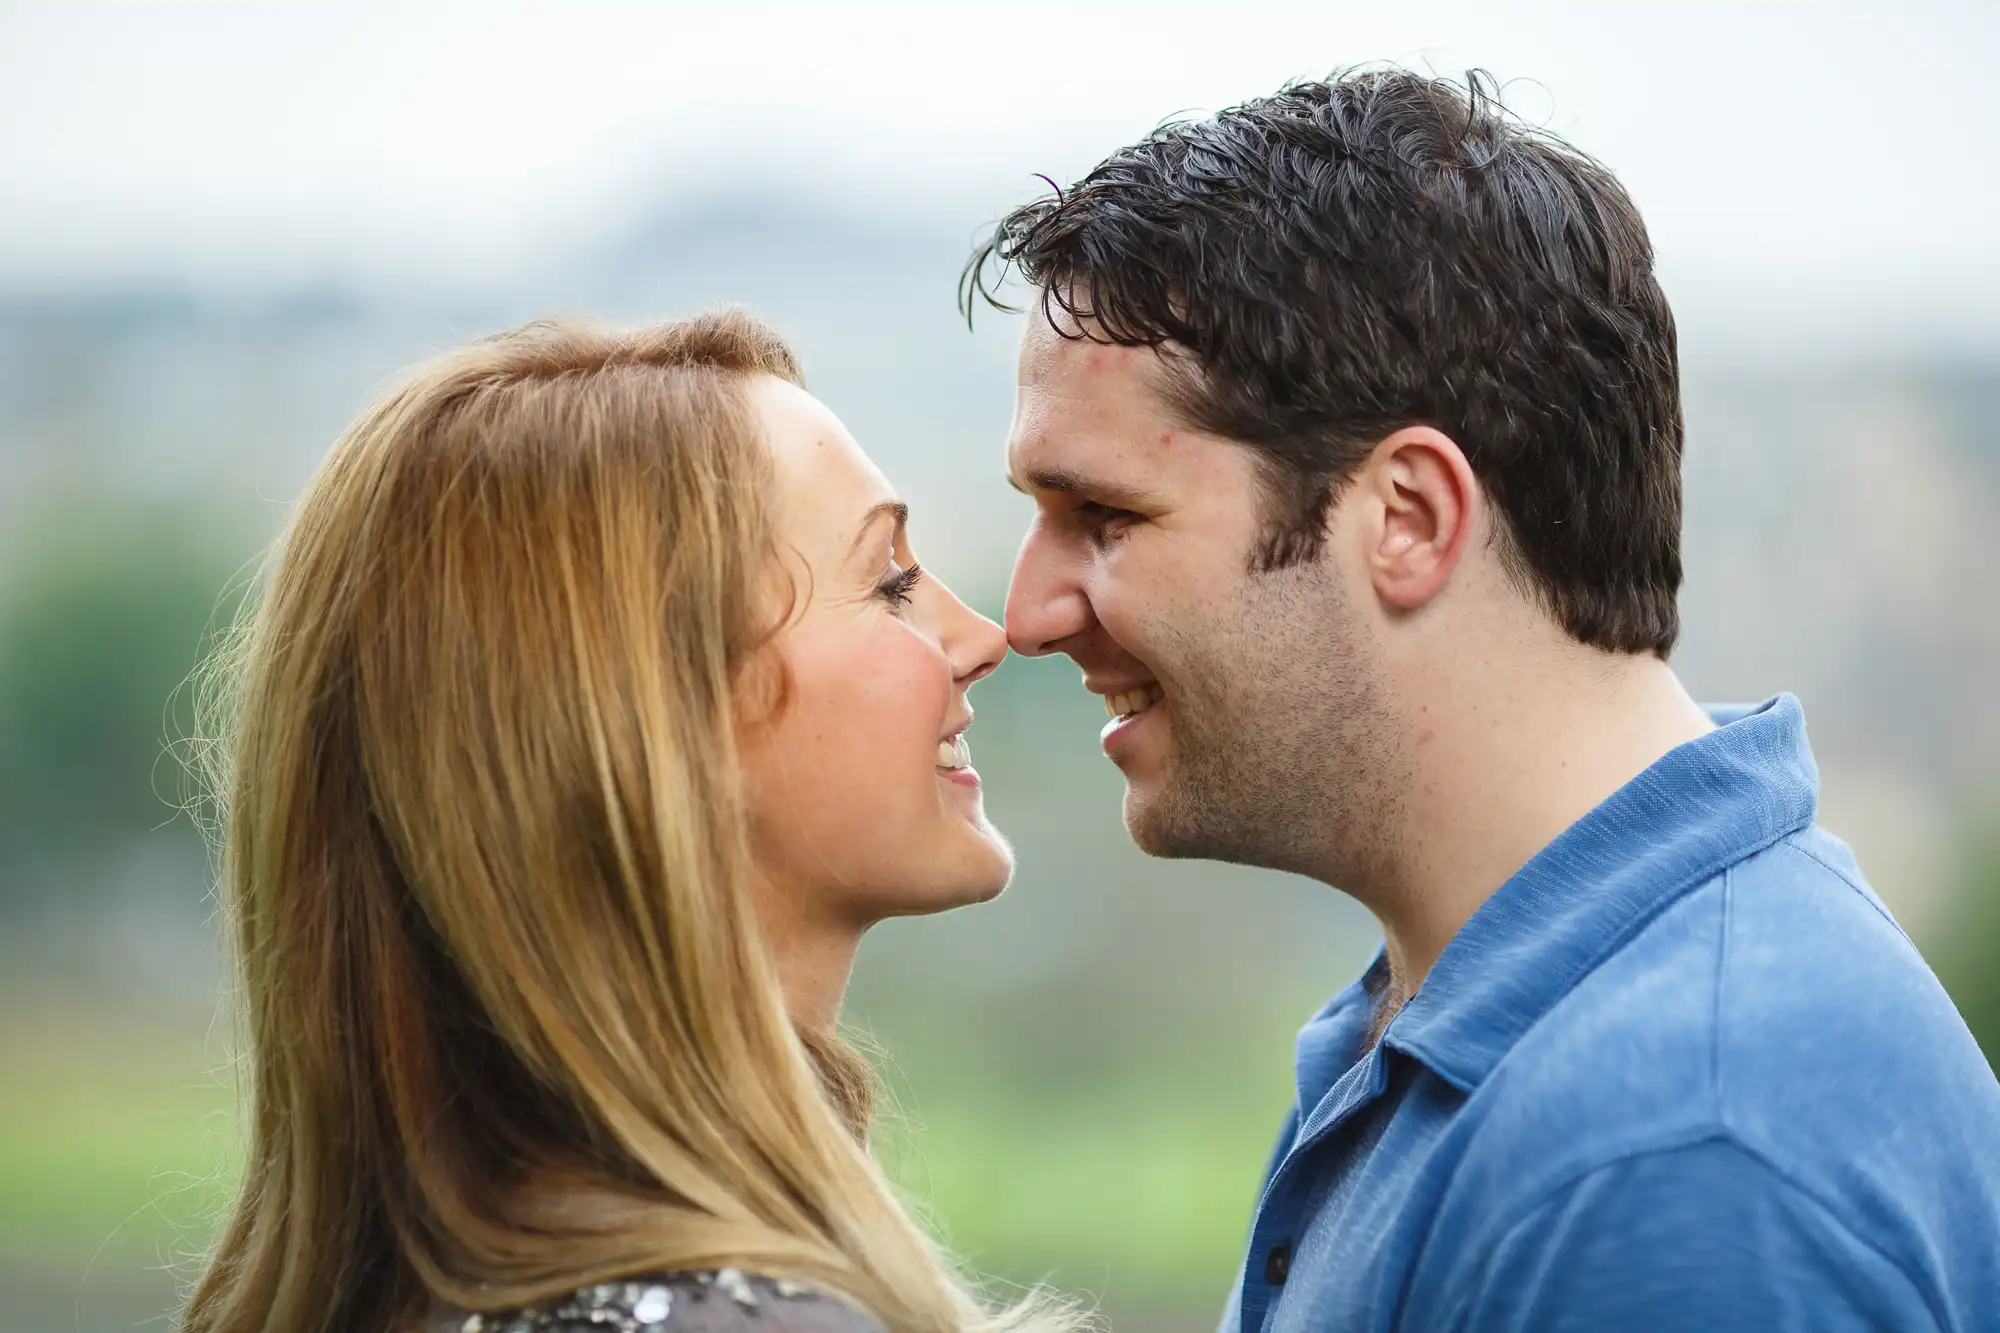 A man and a woman smiling closely at each other outdoors with a softly blurred background.